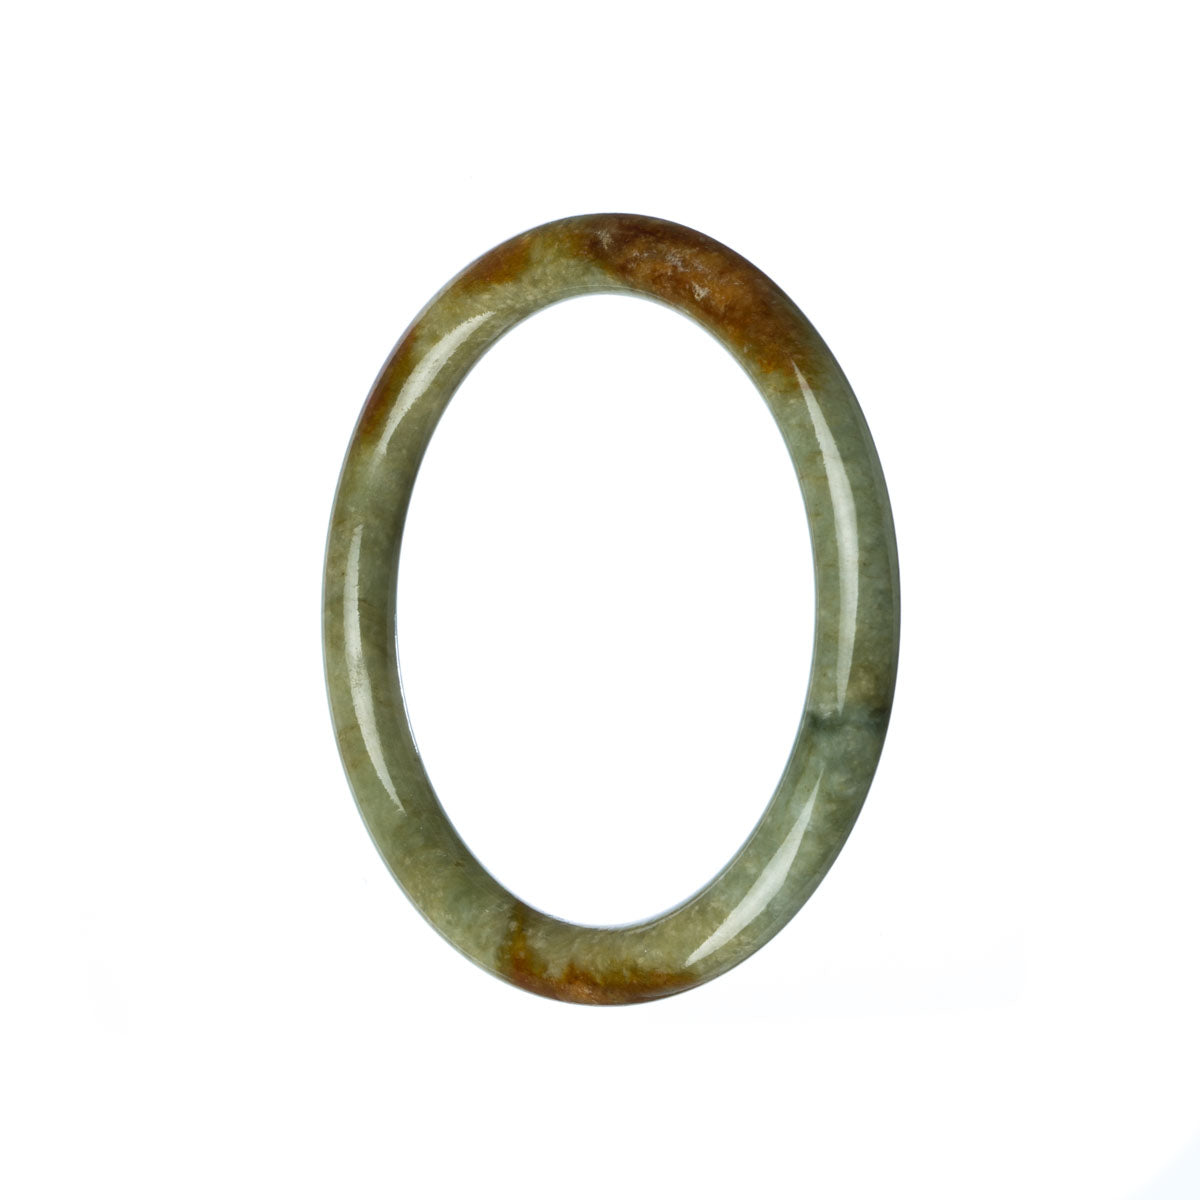 Image of a small, 52mm green-brown jade bangle bracelet with a glossy finish. The bracelet is made from genuine Grade A Burma jade and has been certified as such. It is a delicate and stylish accessory with a timeless appeal.